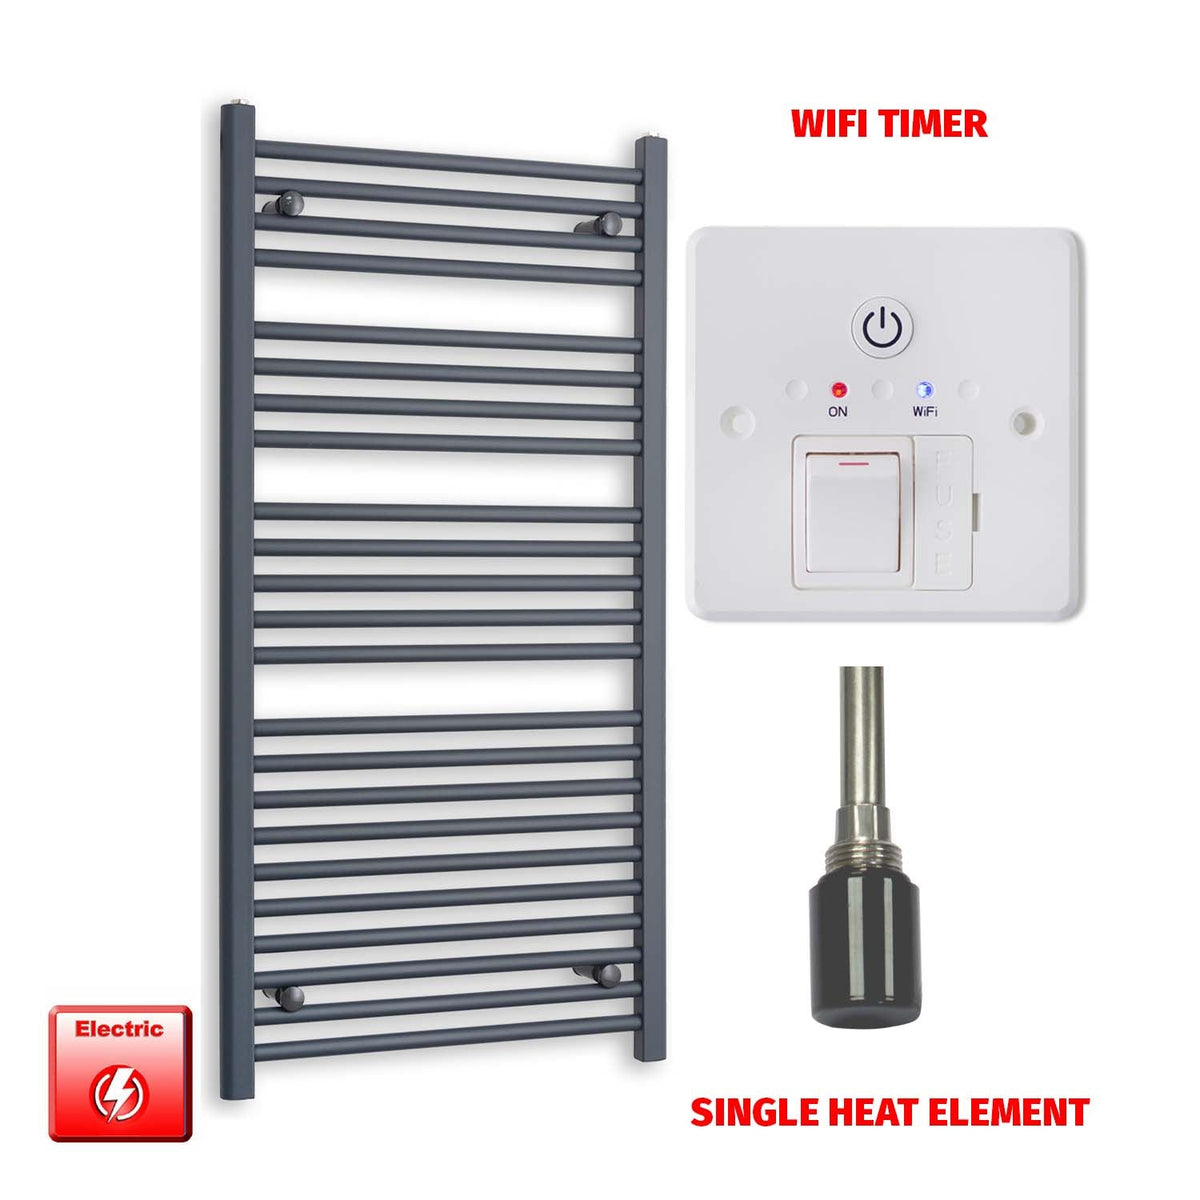 1200mm High 600mm Wide Flat Anthracite Pre-Filled Electric Heated Towel Rail Radiator HTR Single heat element Wifi timer